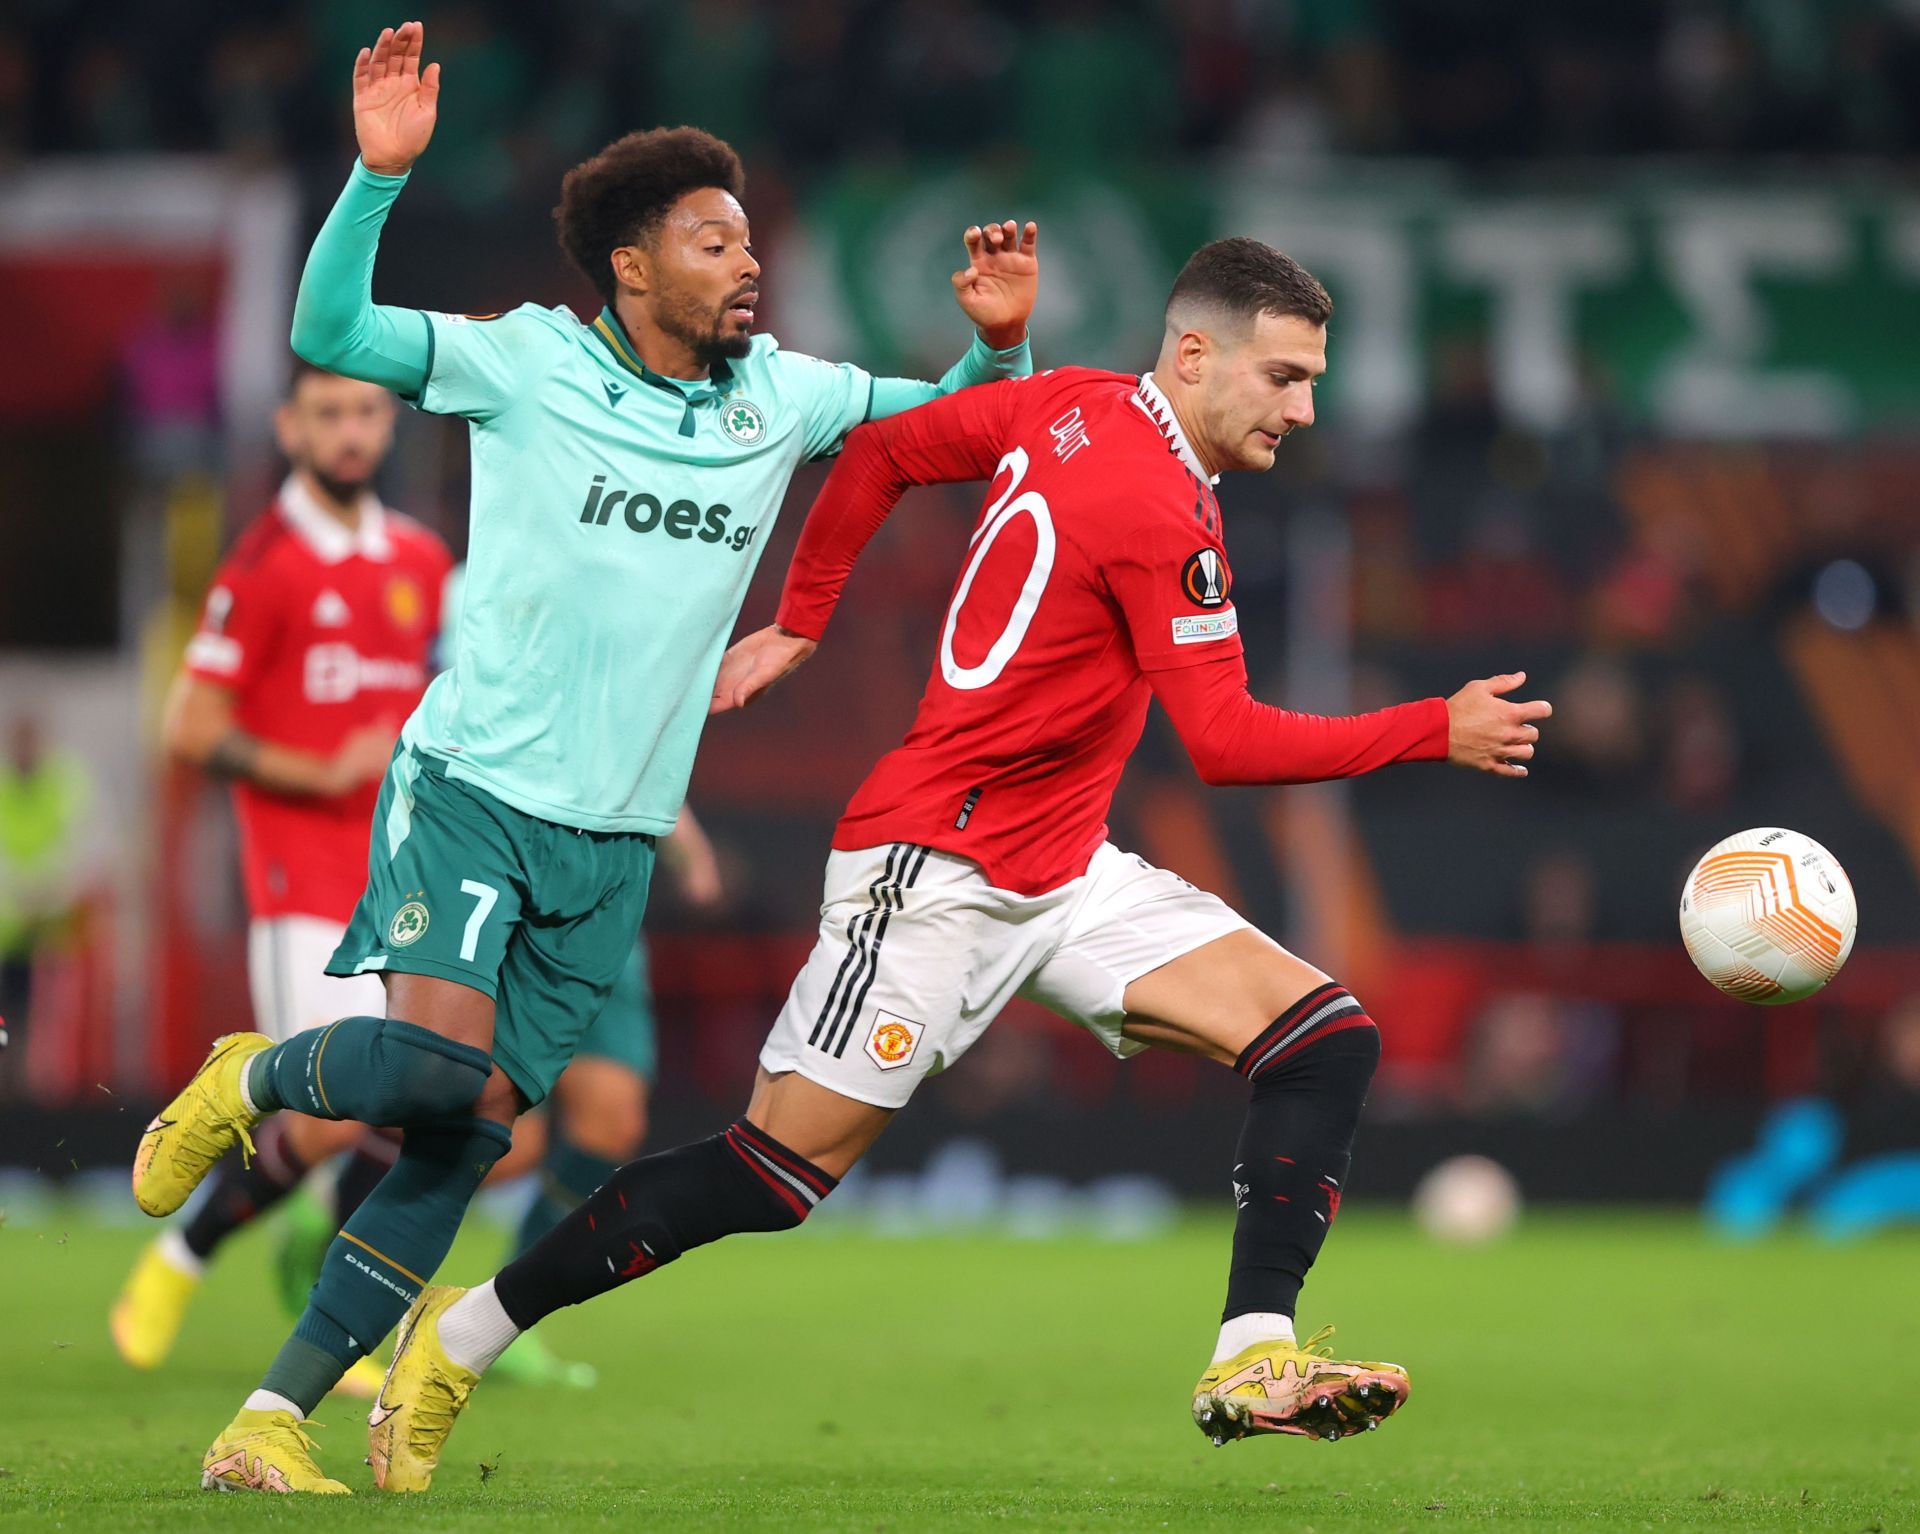 Dalot plays as a right-back for Manchester United